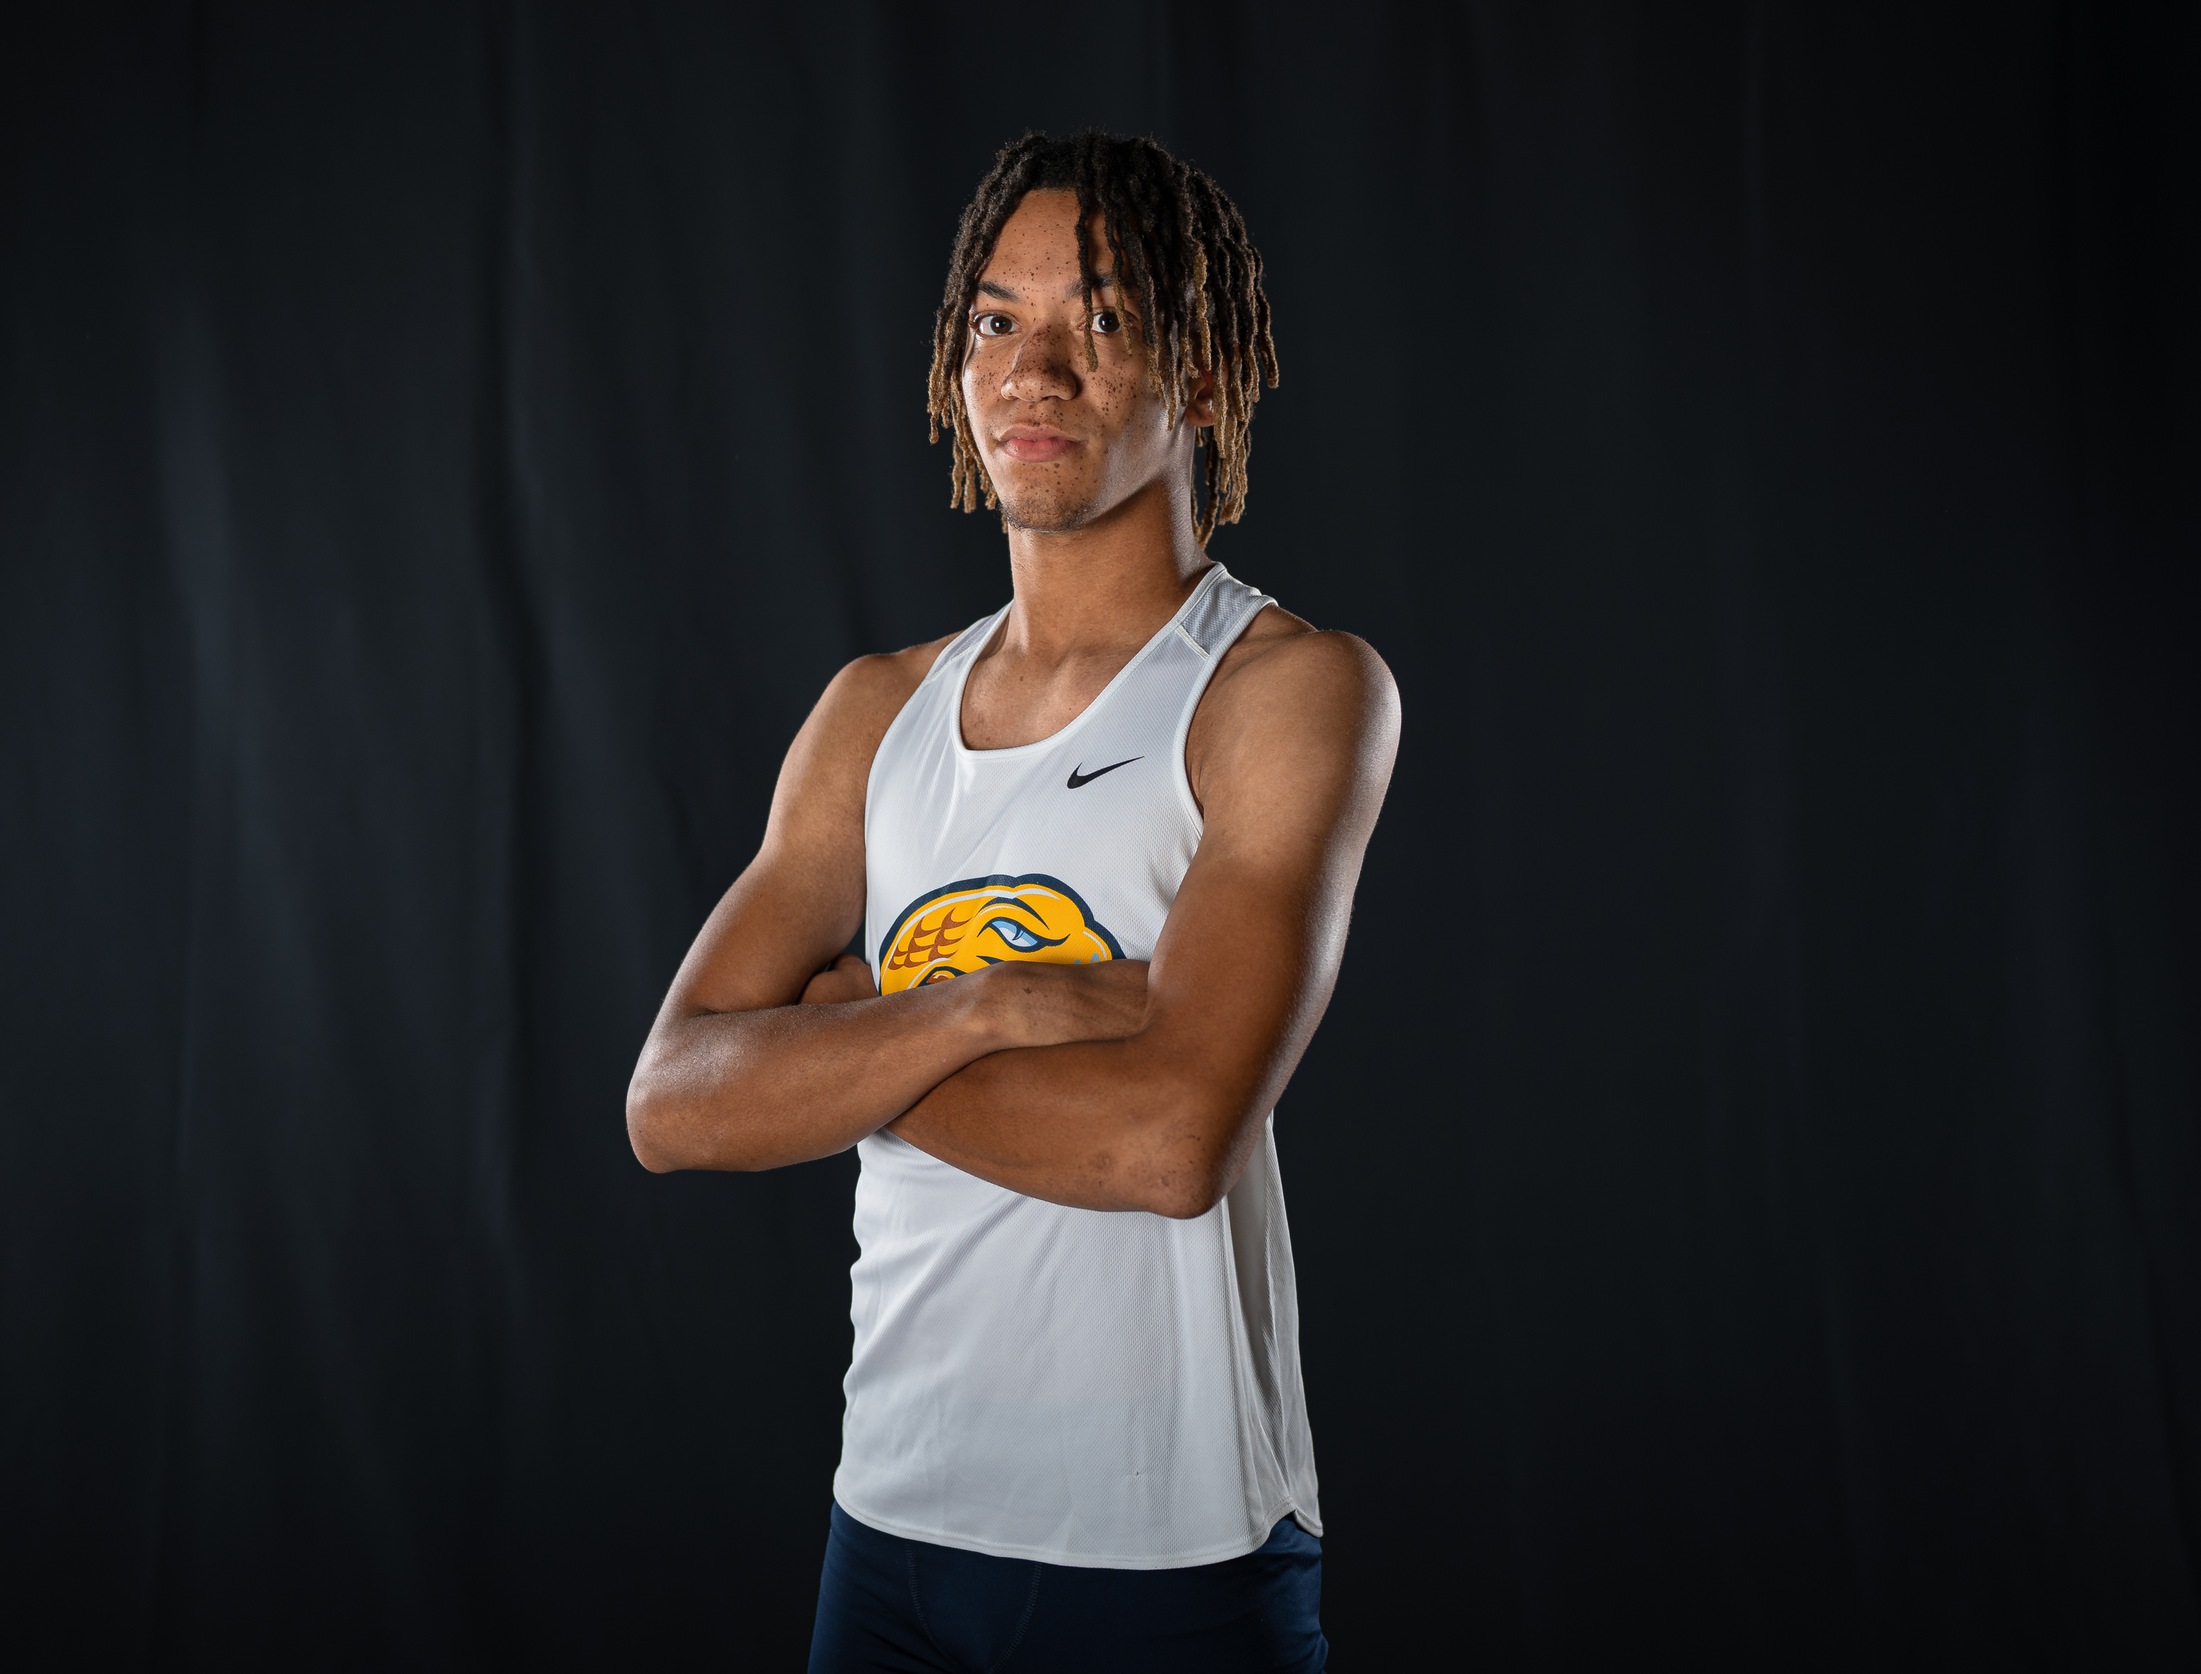 Men's Track and Field Takes on the USC Invitational